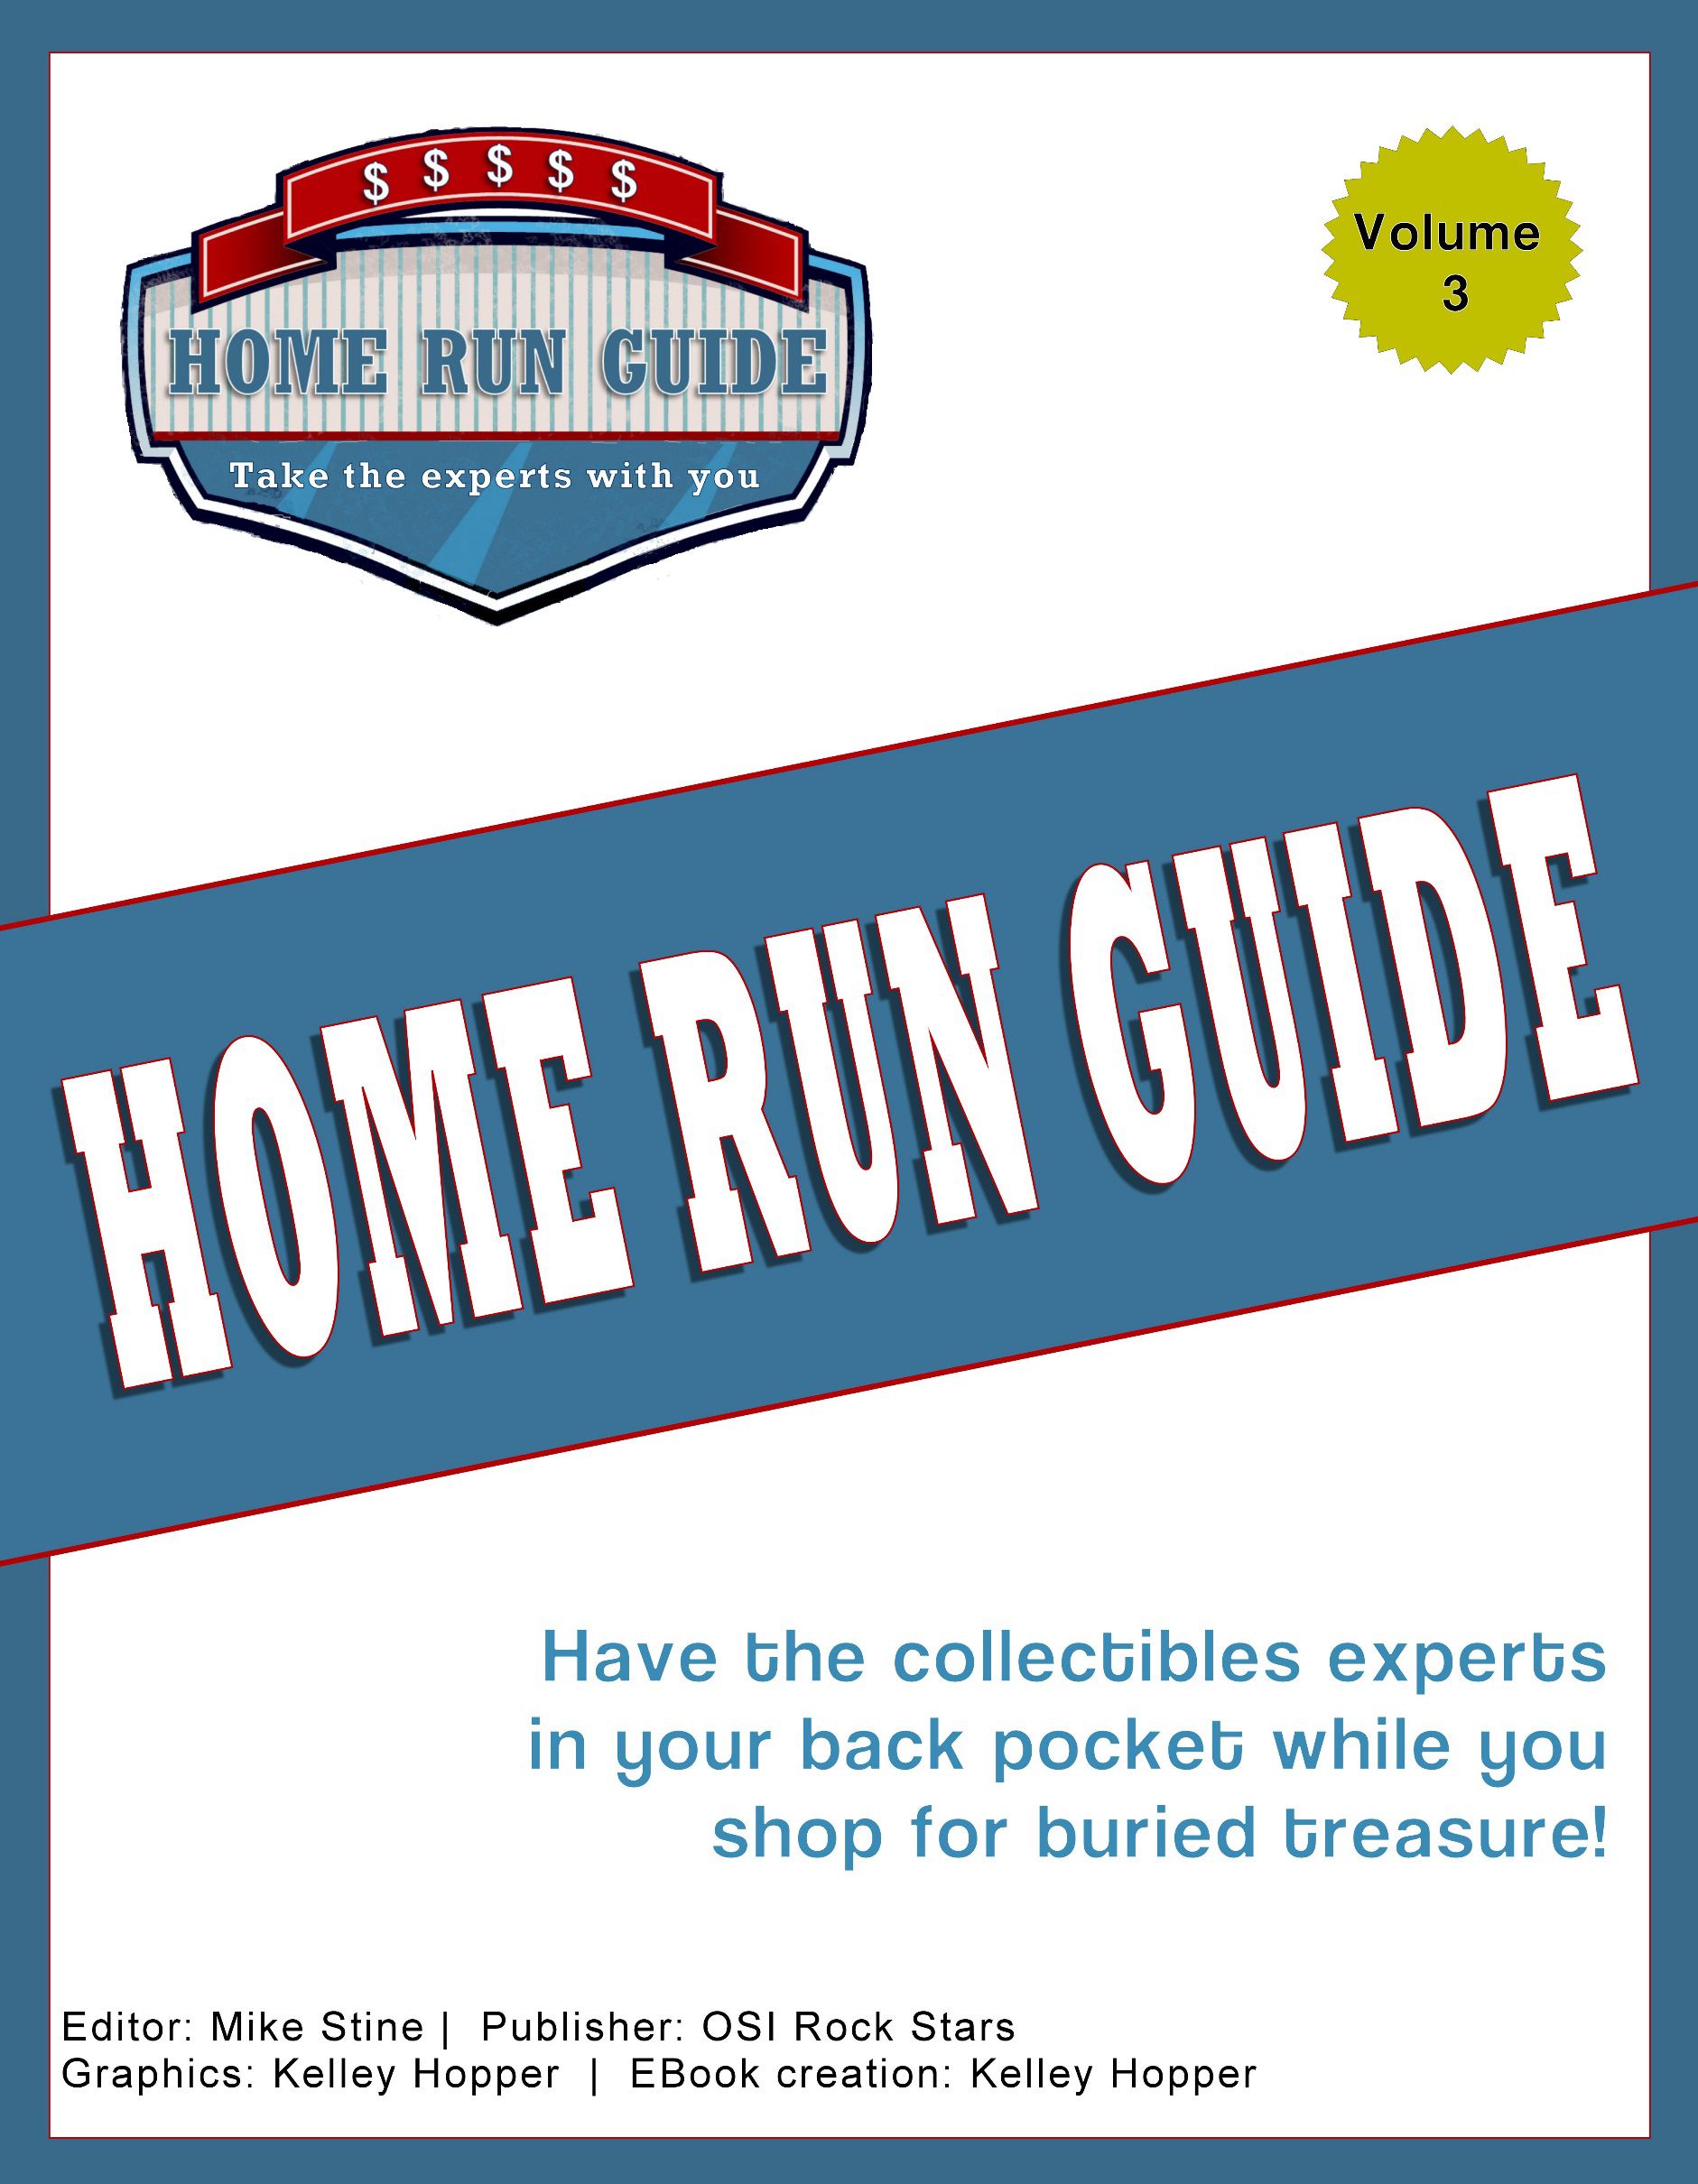 Home Run Guide: Have the collectibles experts in your back pocket while you shop for buried treasure!